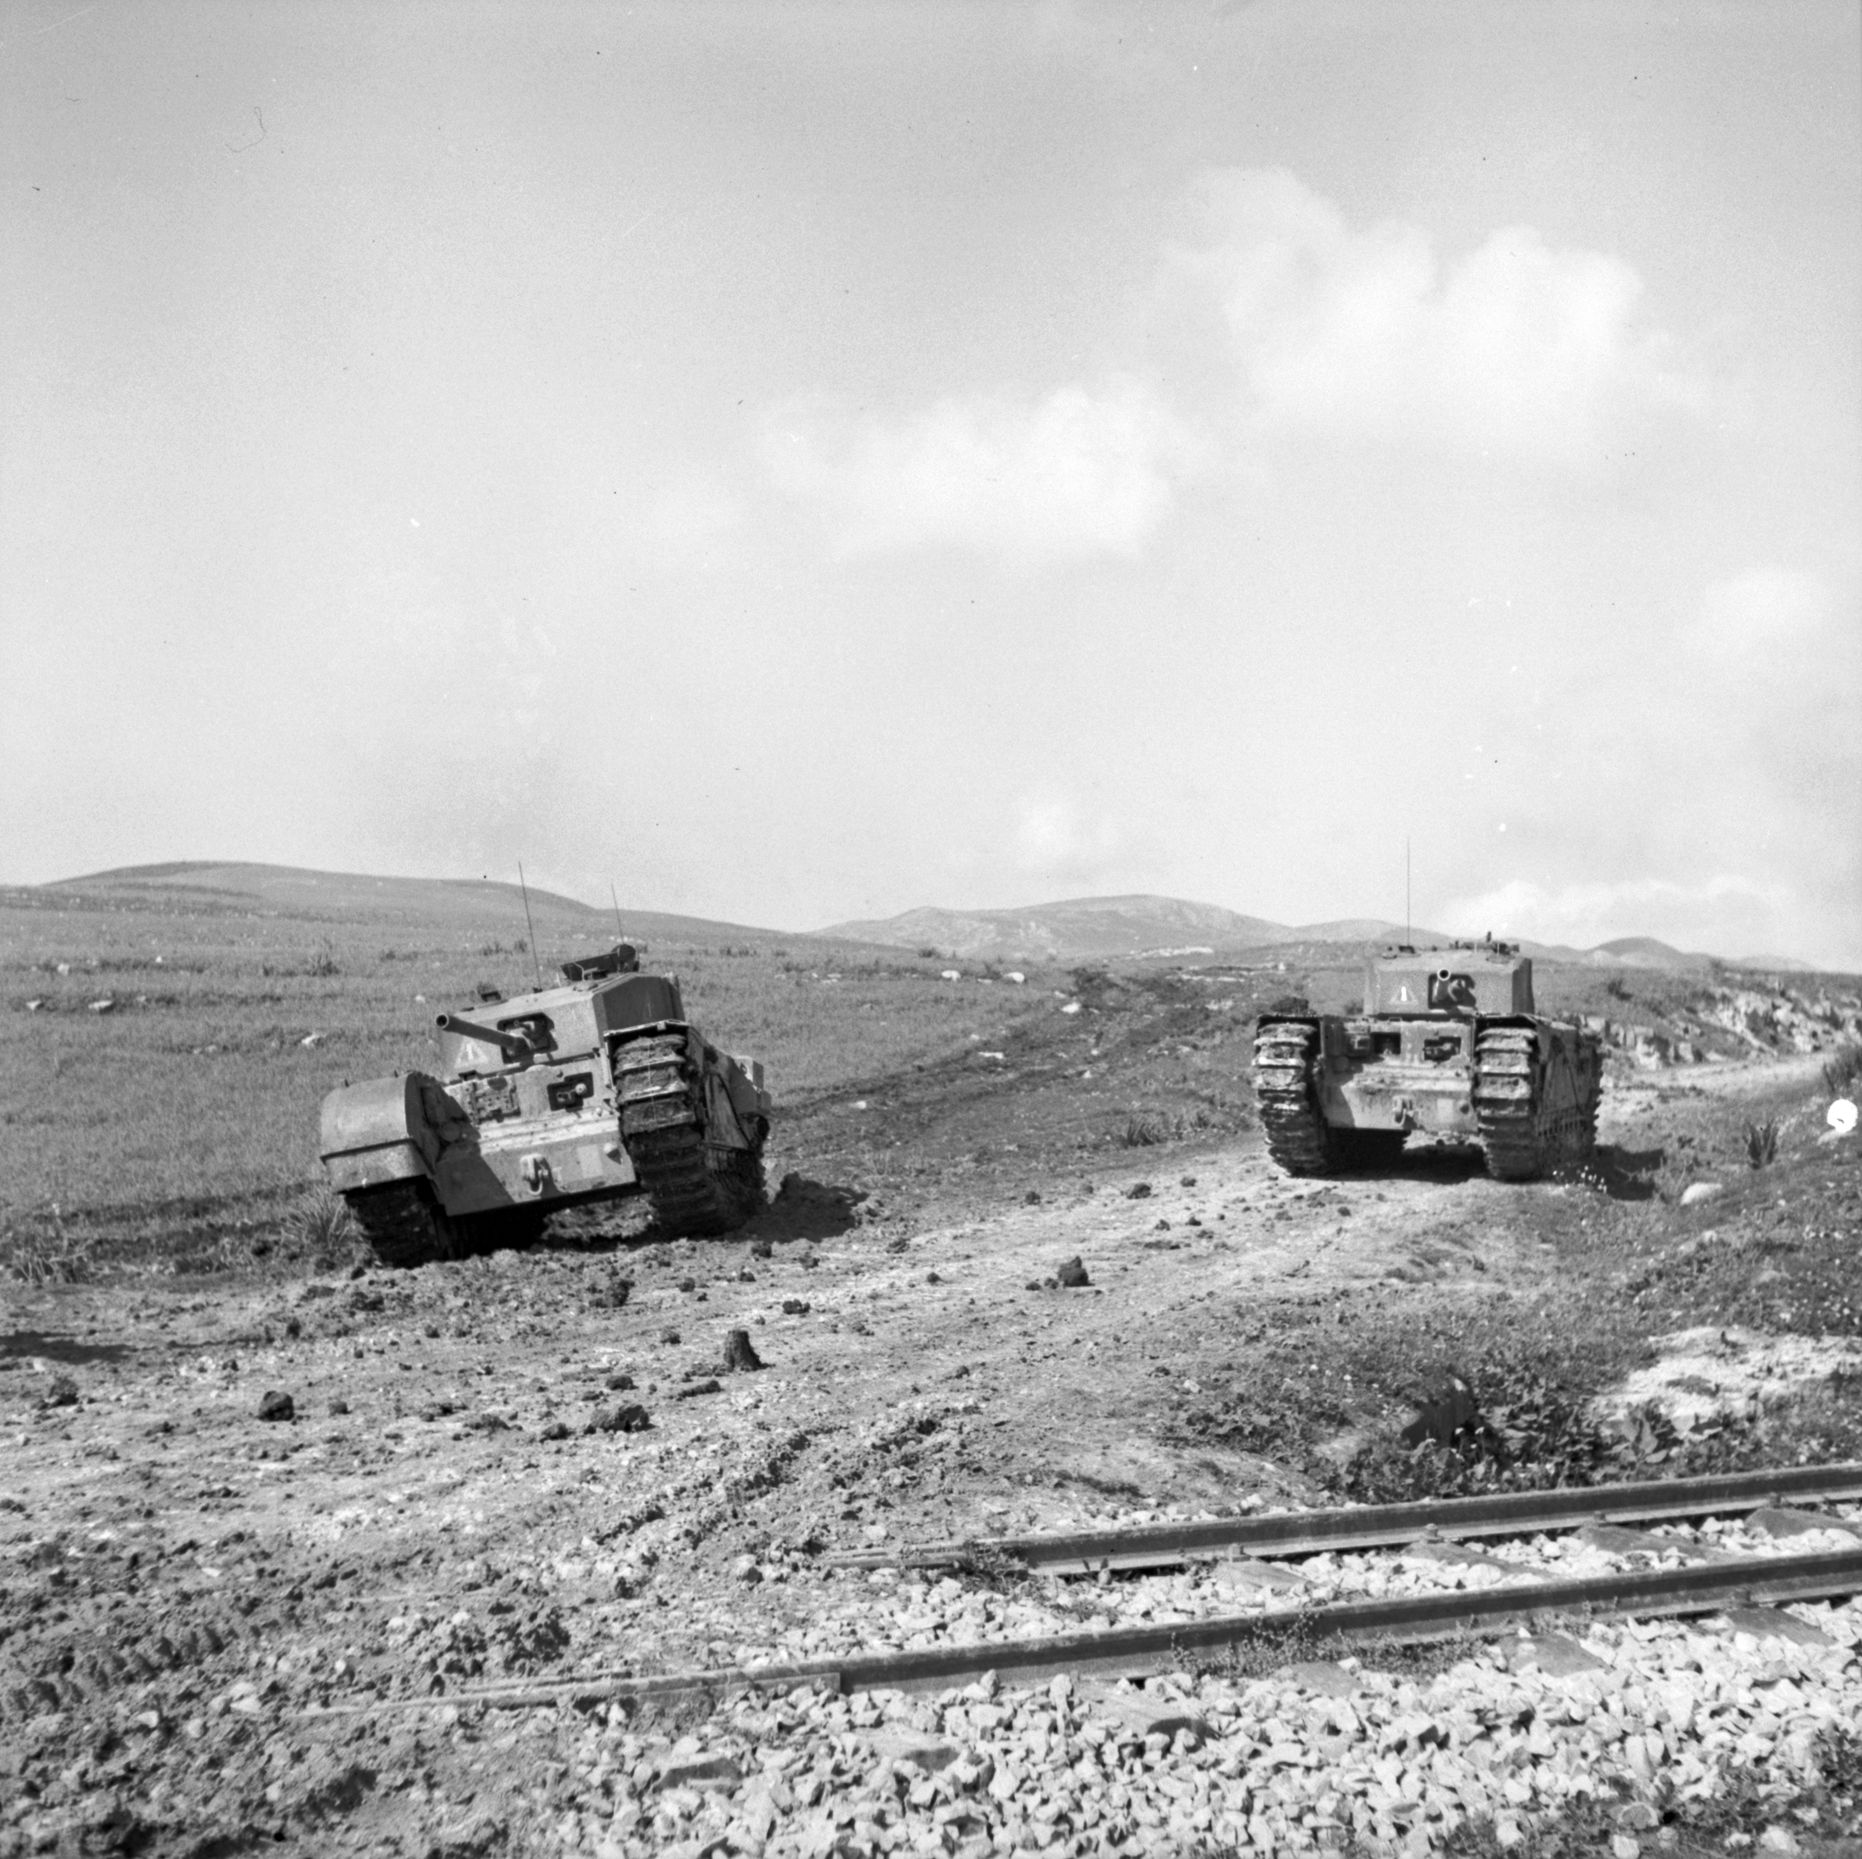 Two British Churchill tanks move along the desert floor the day of the fight at Steamroller Farm. When Hollands and Lieutenant J.G. Renton managed to return to friendly lines, their fellow soldiers did not believe the amount of destruction they caused the Germans. When the battlefield was inspected days later, the damage was even greater than the two officers reported. 